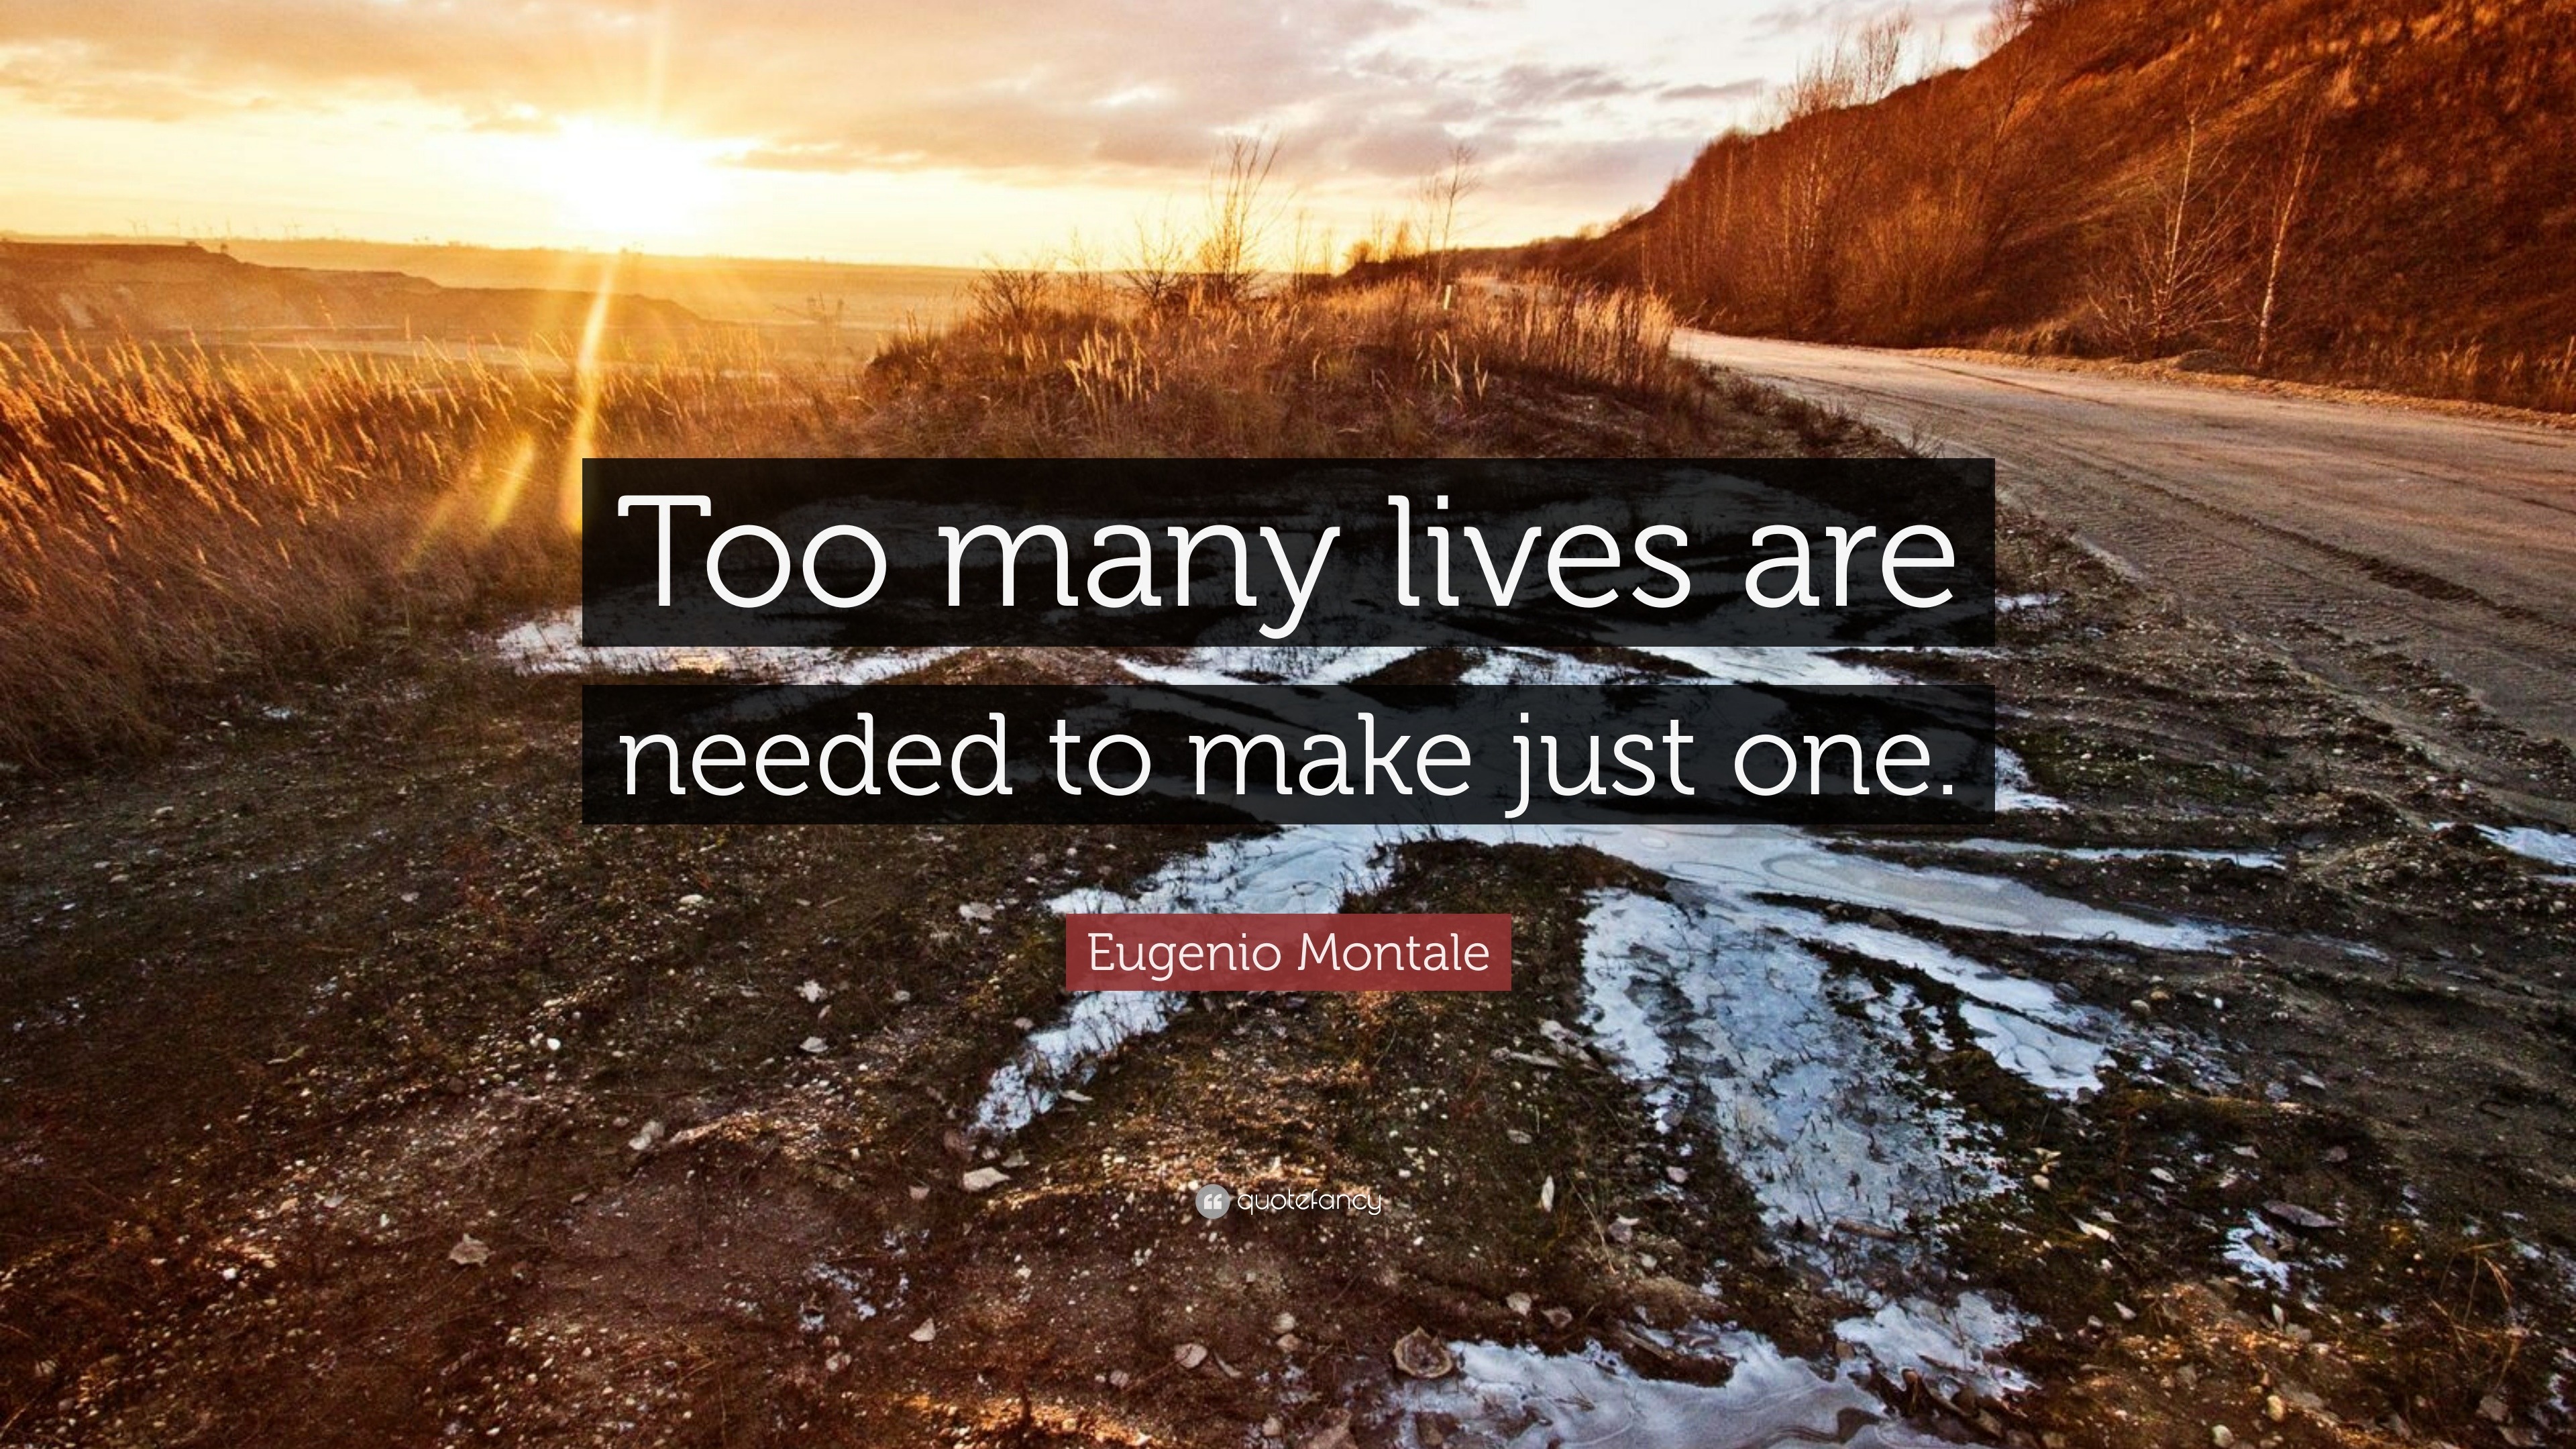 Eugenio Montale Quote: “Too many lives are needed to make just one.”